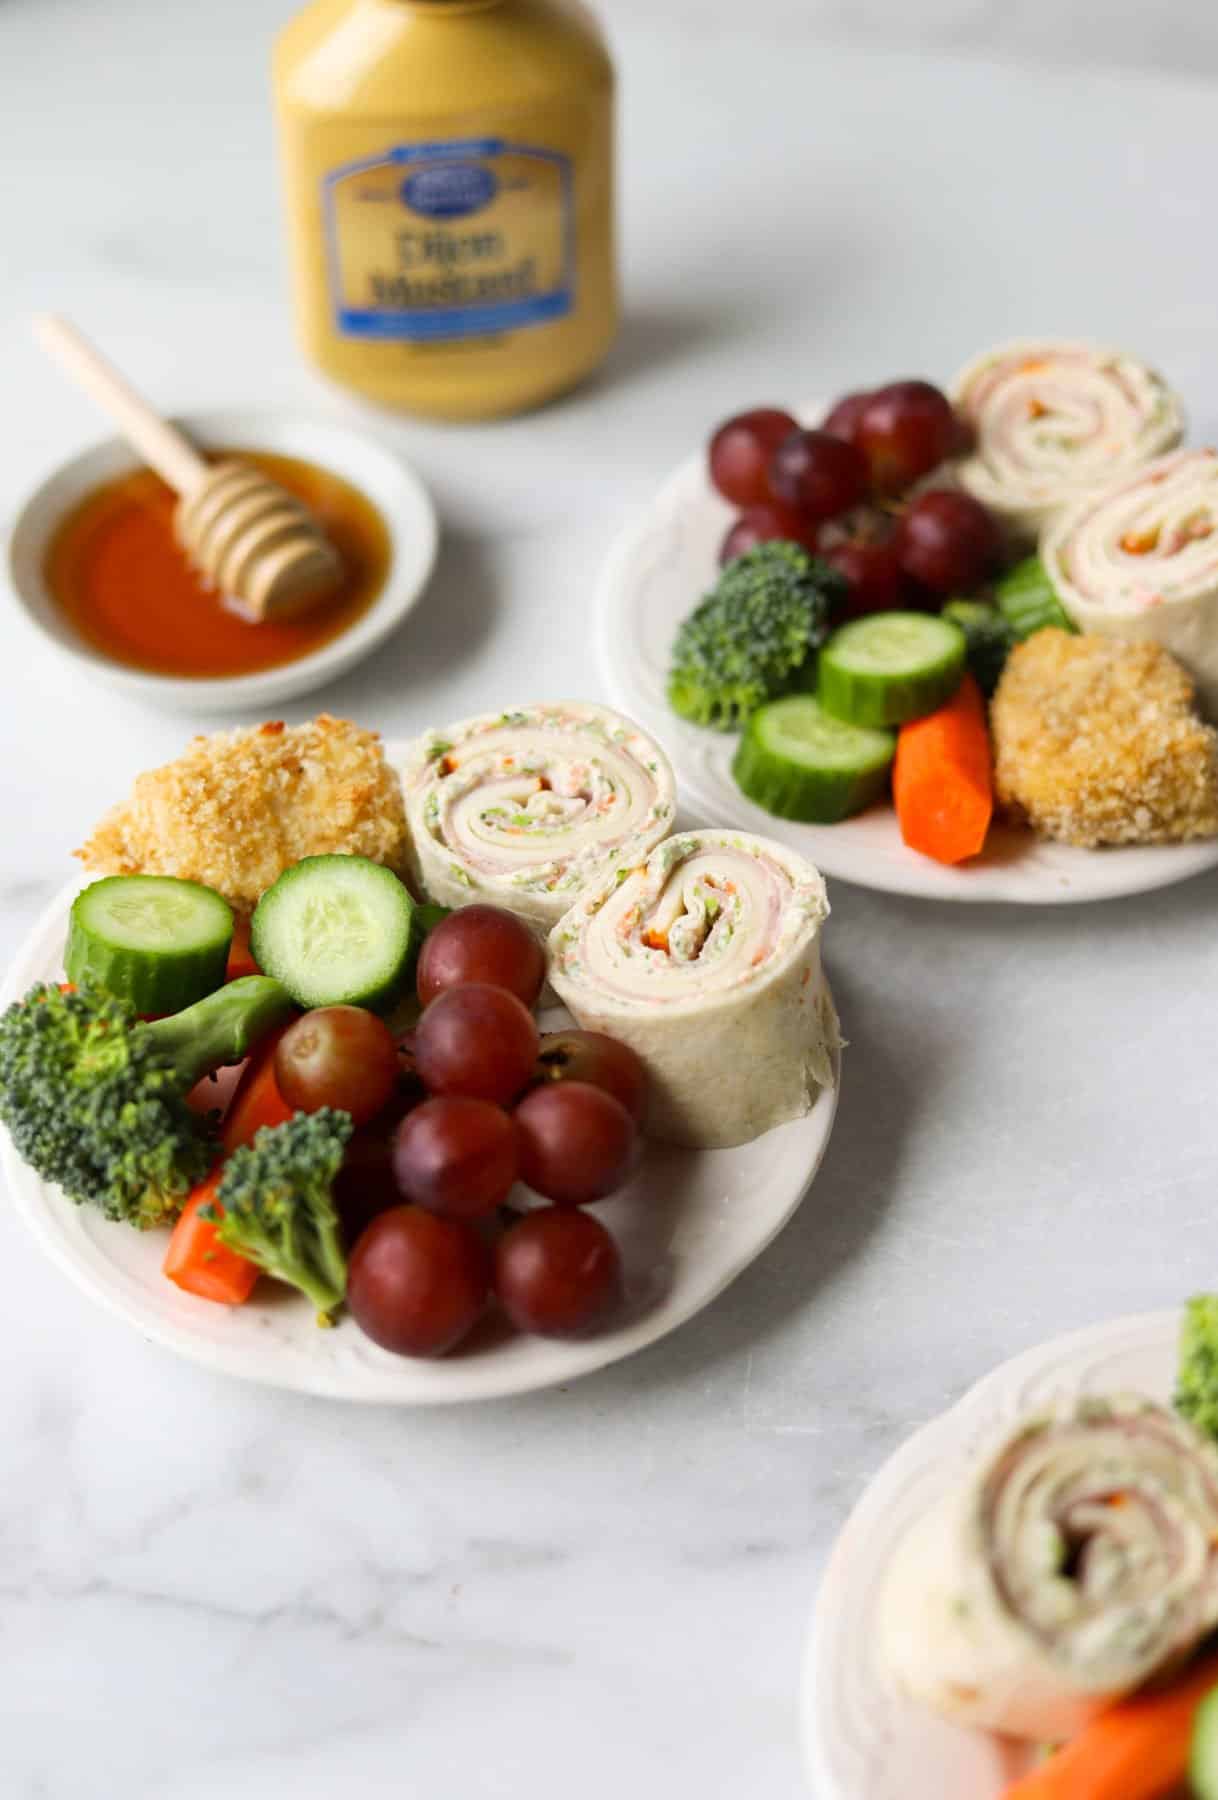 Mini snack plates on white marble backdrop (one of the back-to-school healthy recipes)